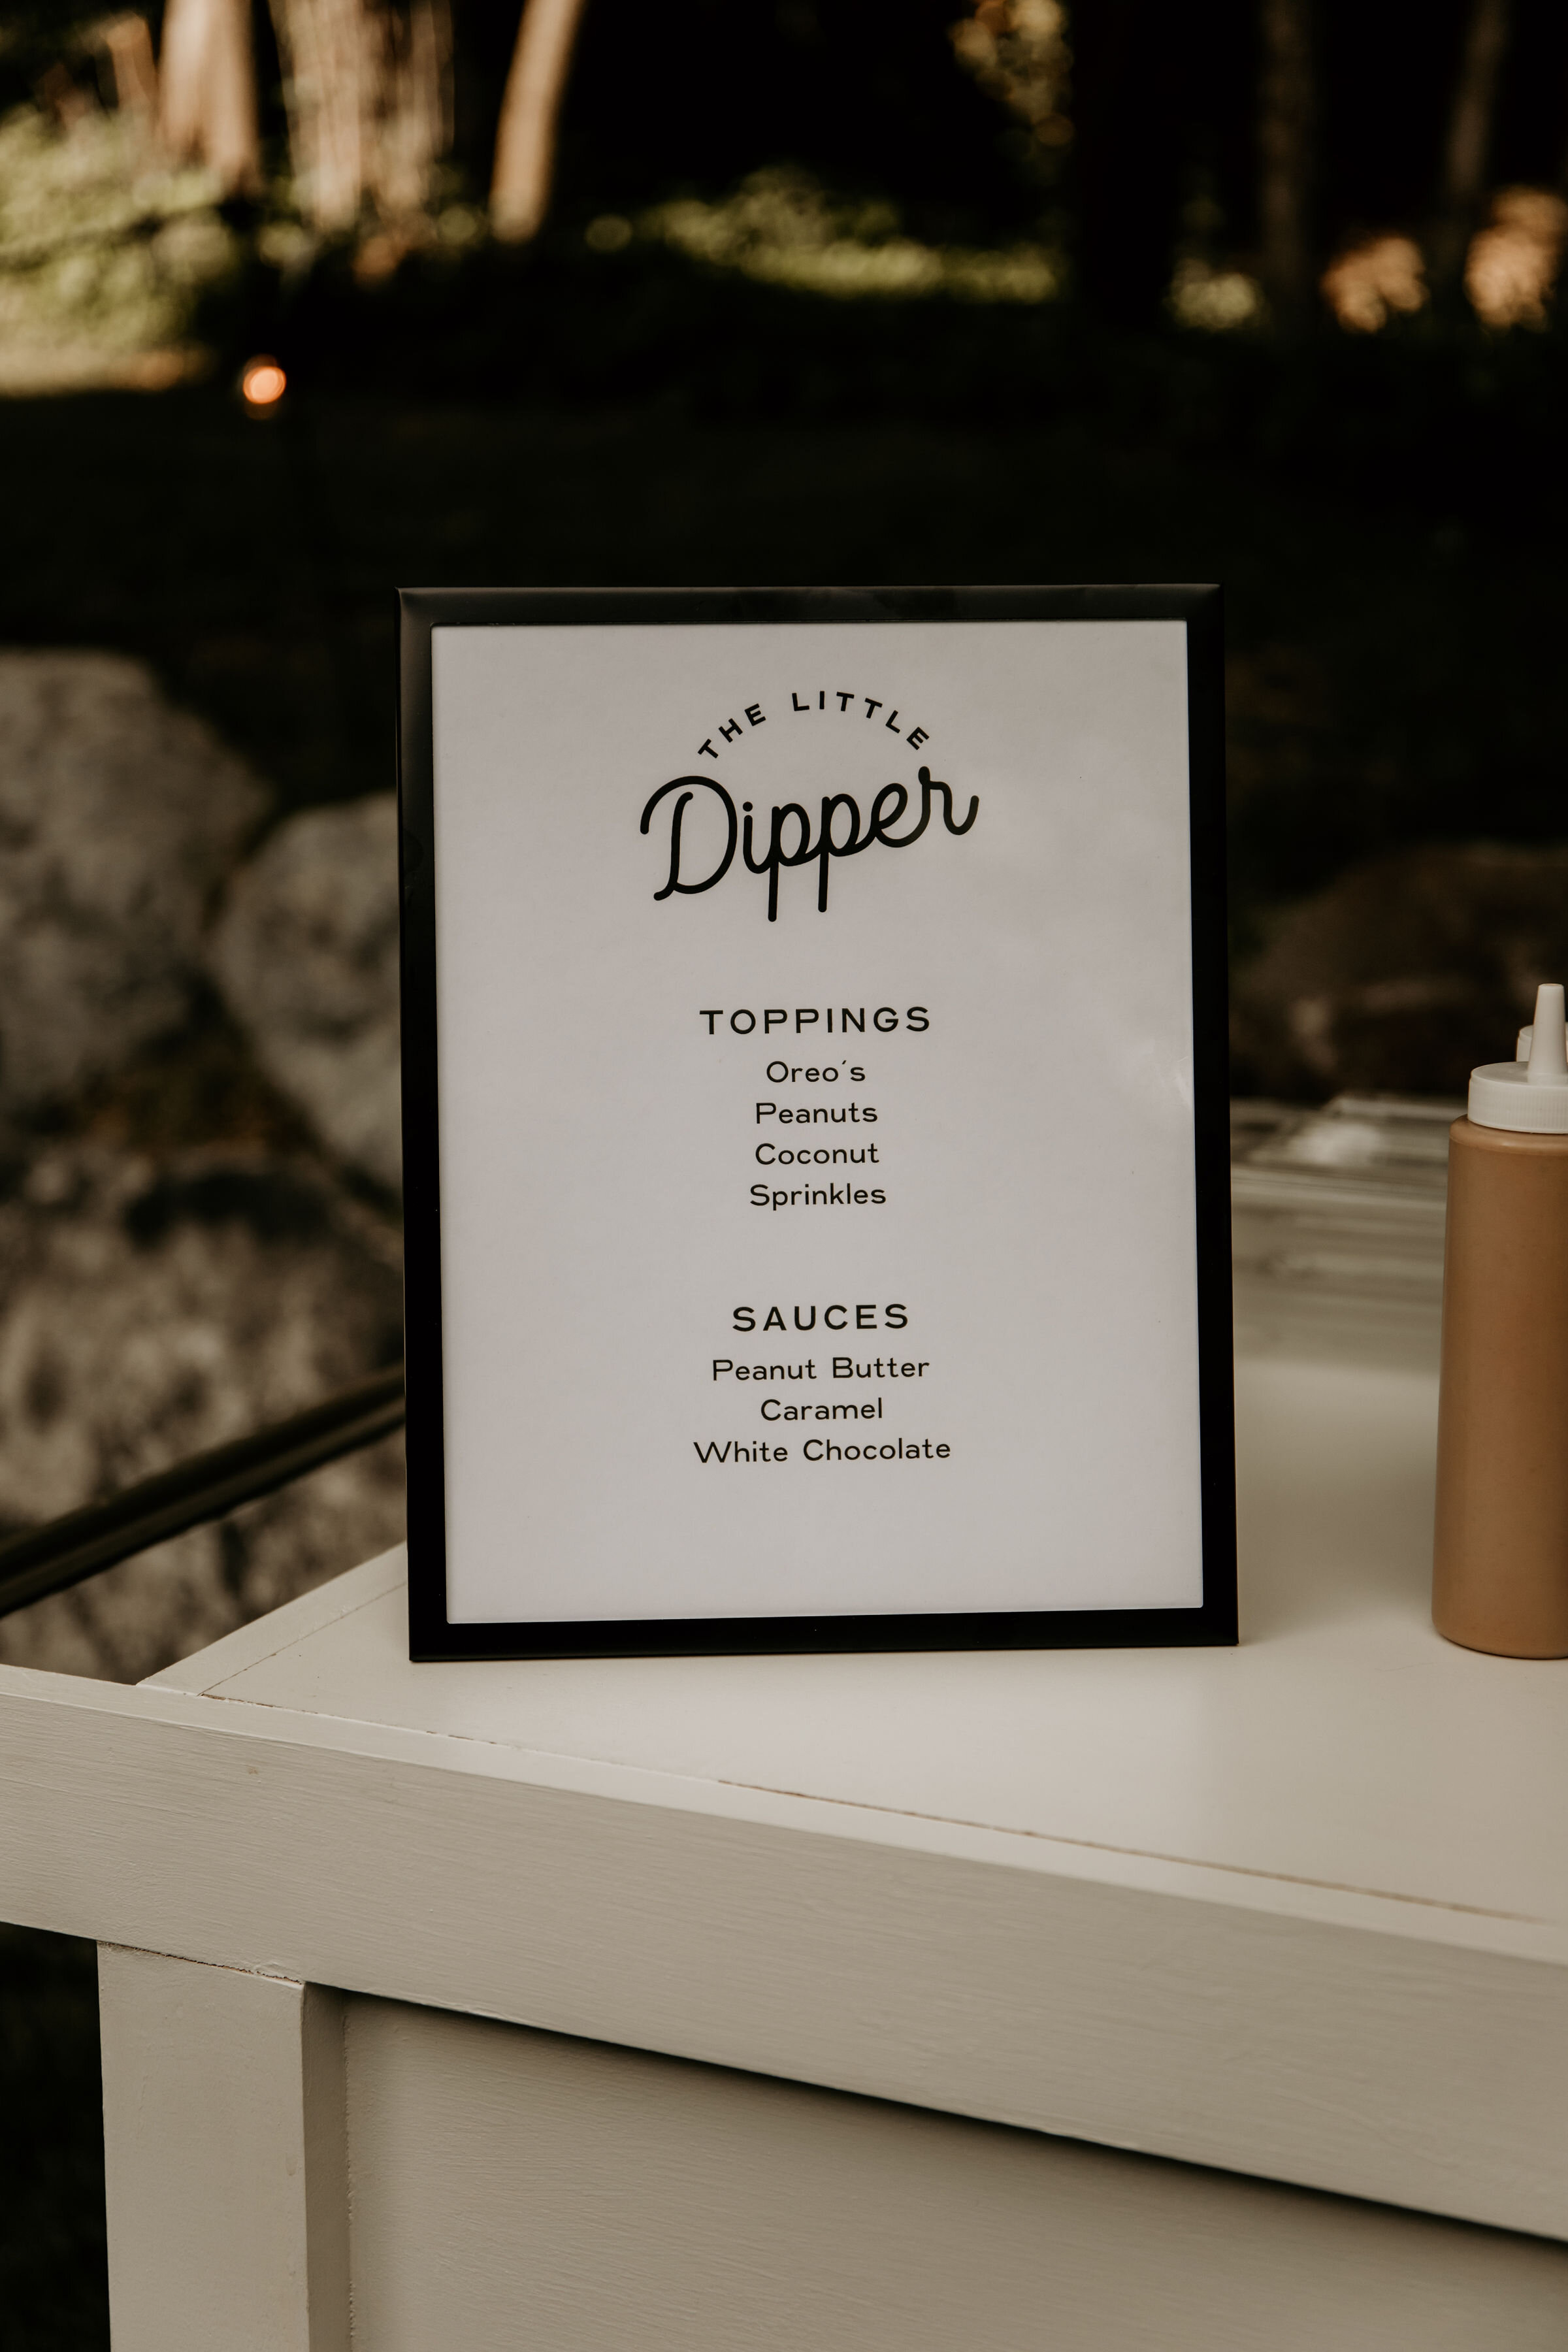  One of my favorite elements of our wedding was    The Little Dipper Frozen Banana Cart   . The pictured couple began this business during quarantine, and when I found them on Instagram I knew we had to book them! We were their first wedding, and I l